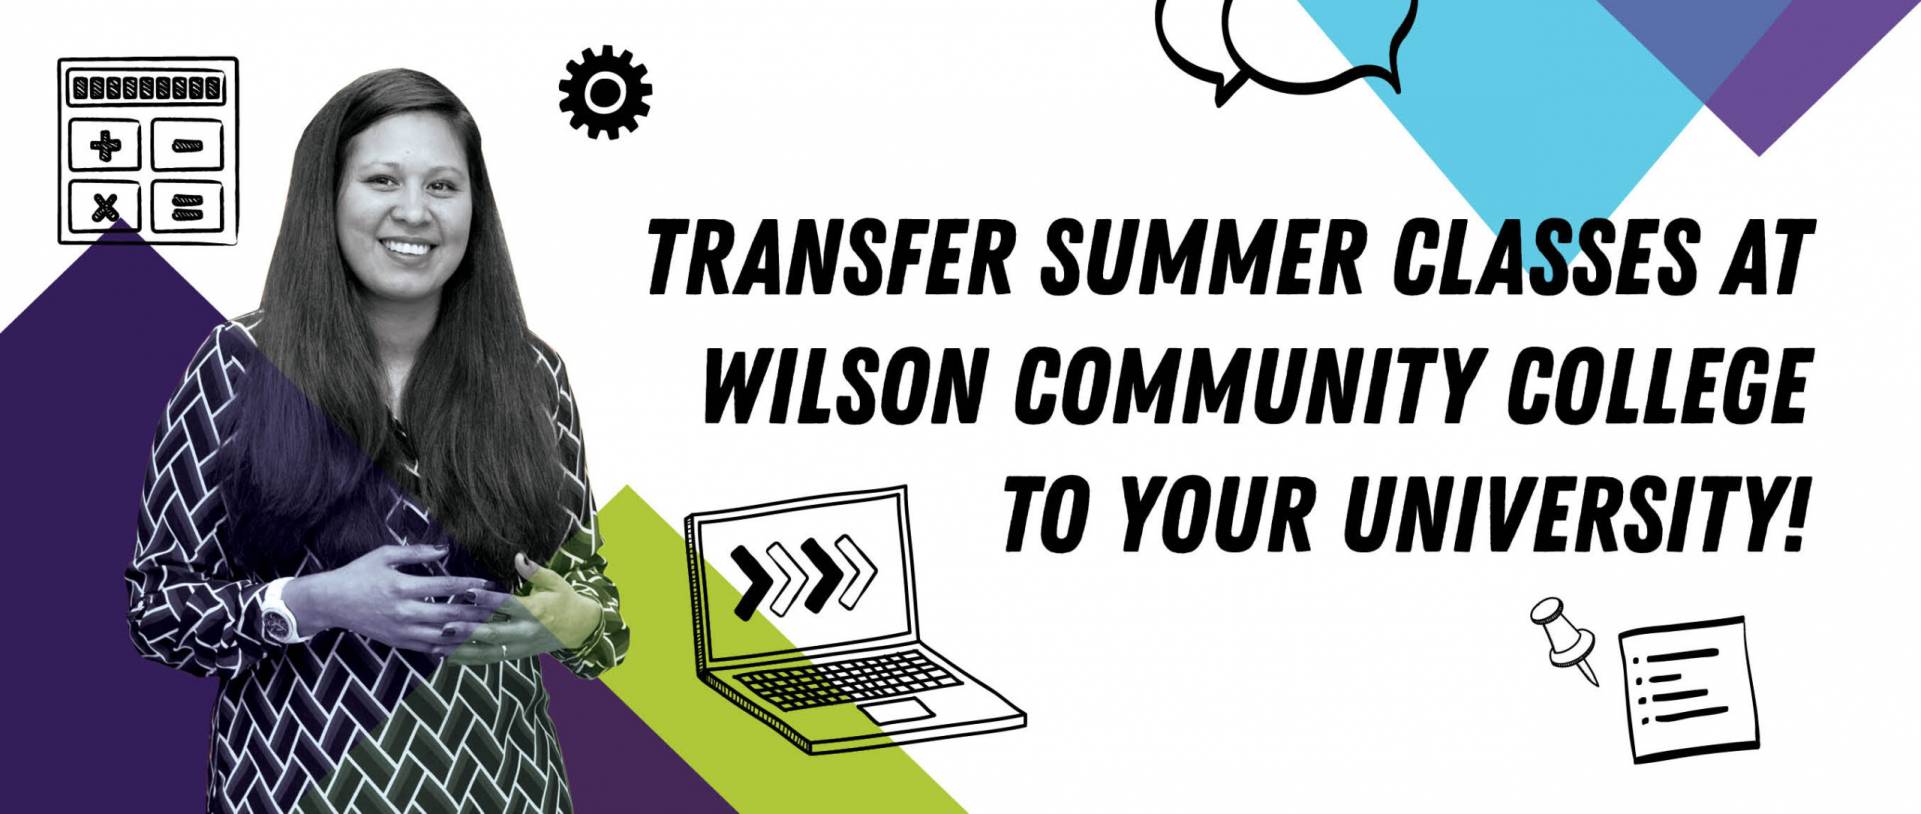 Transfer summer classes at Wilson Community College to your university!